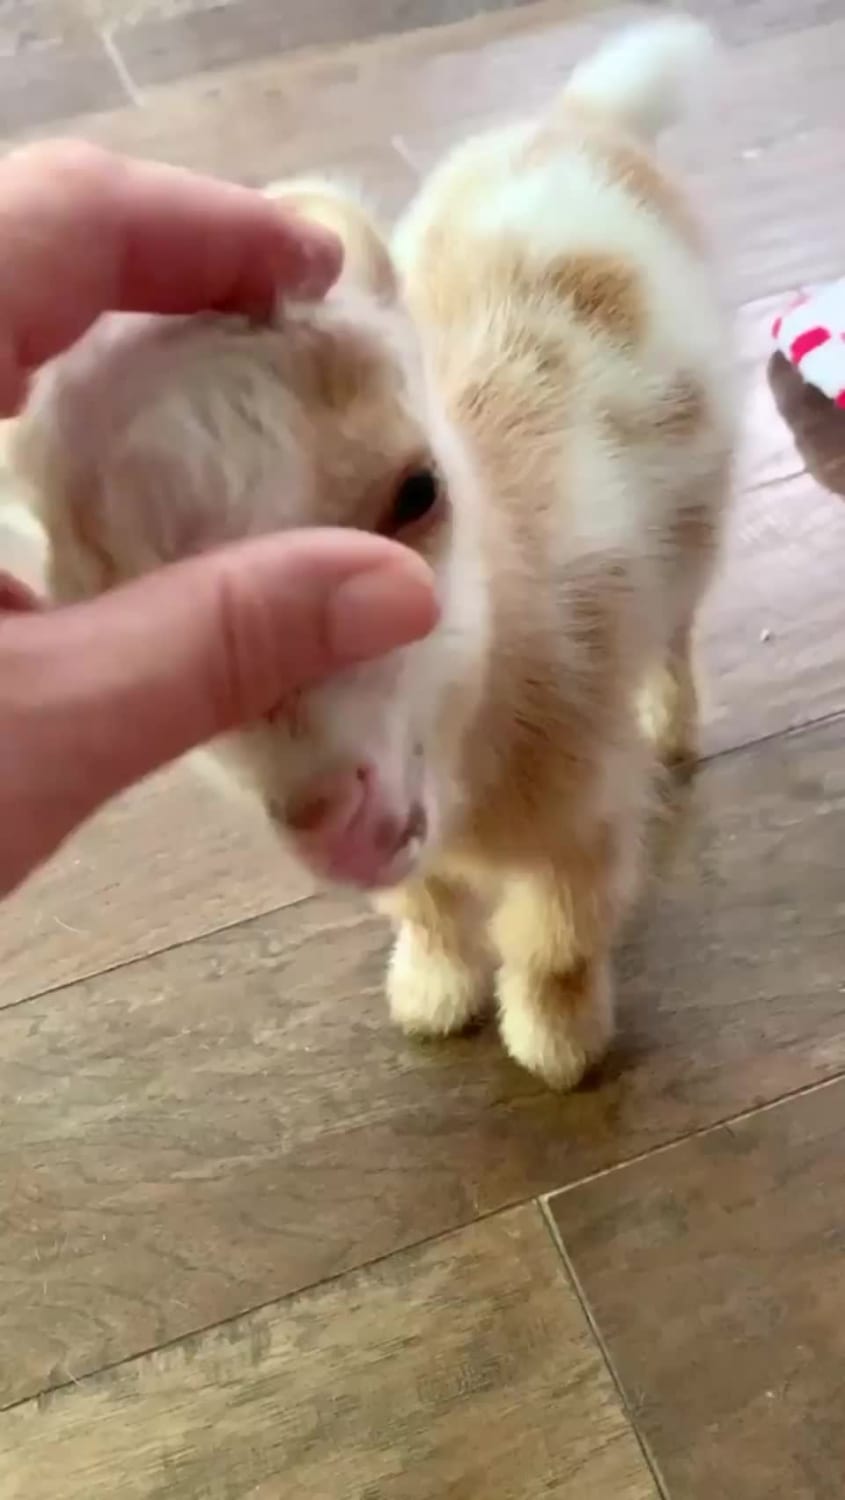 Baby goat has curly ears